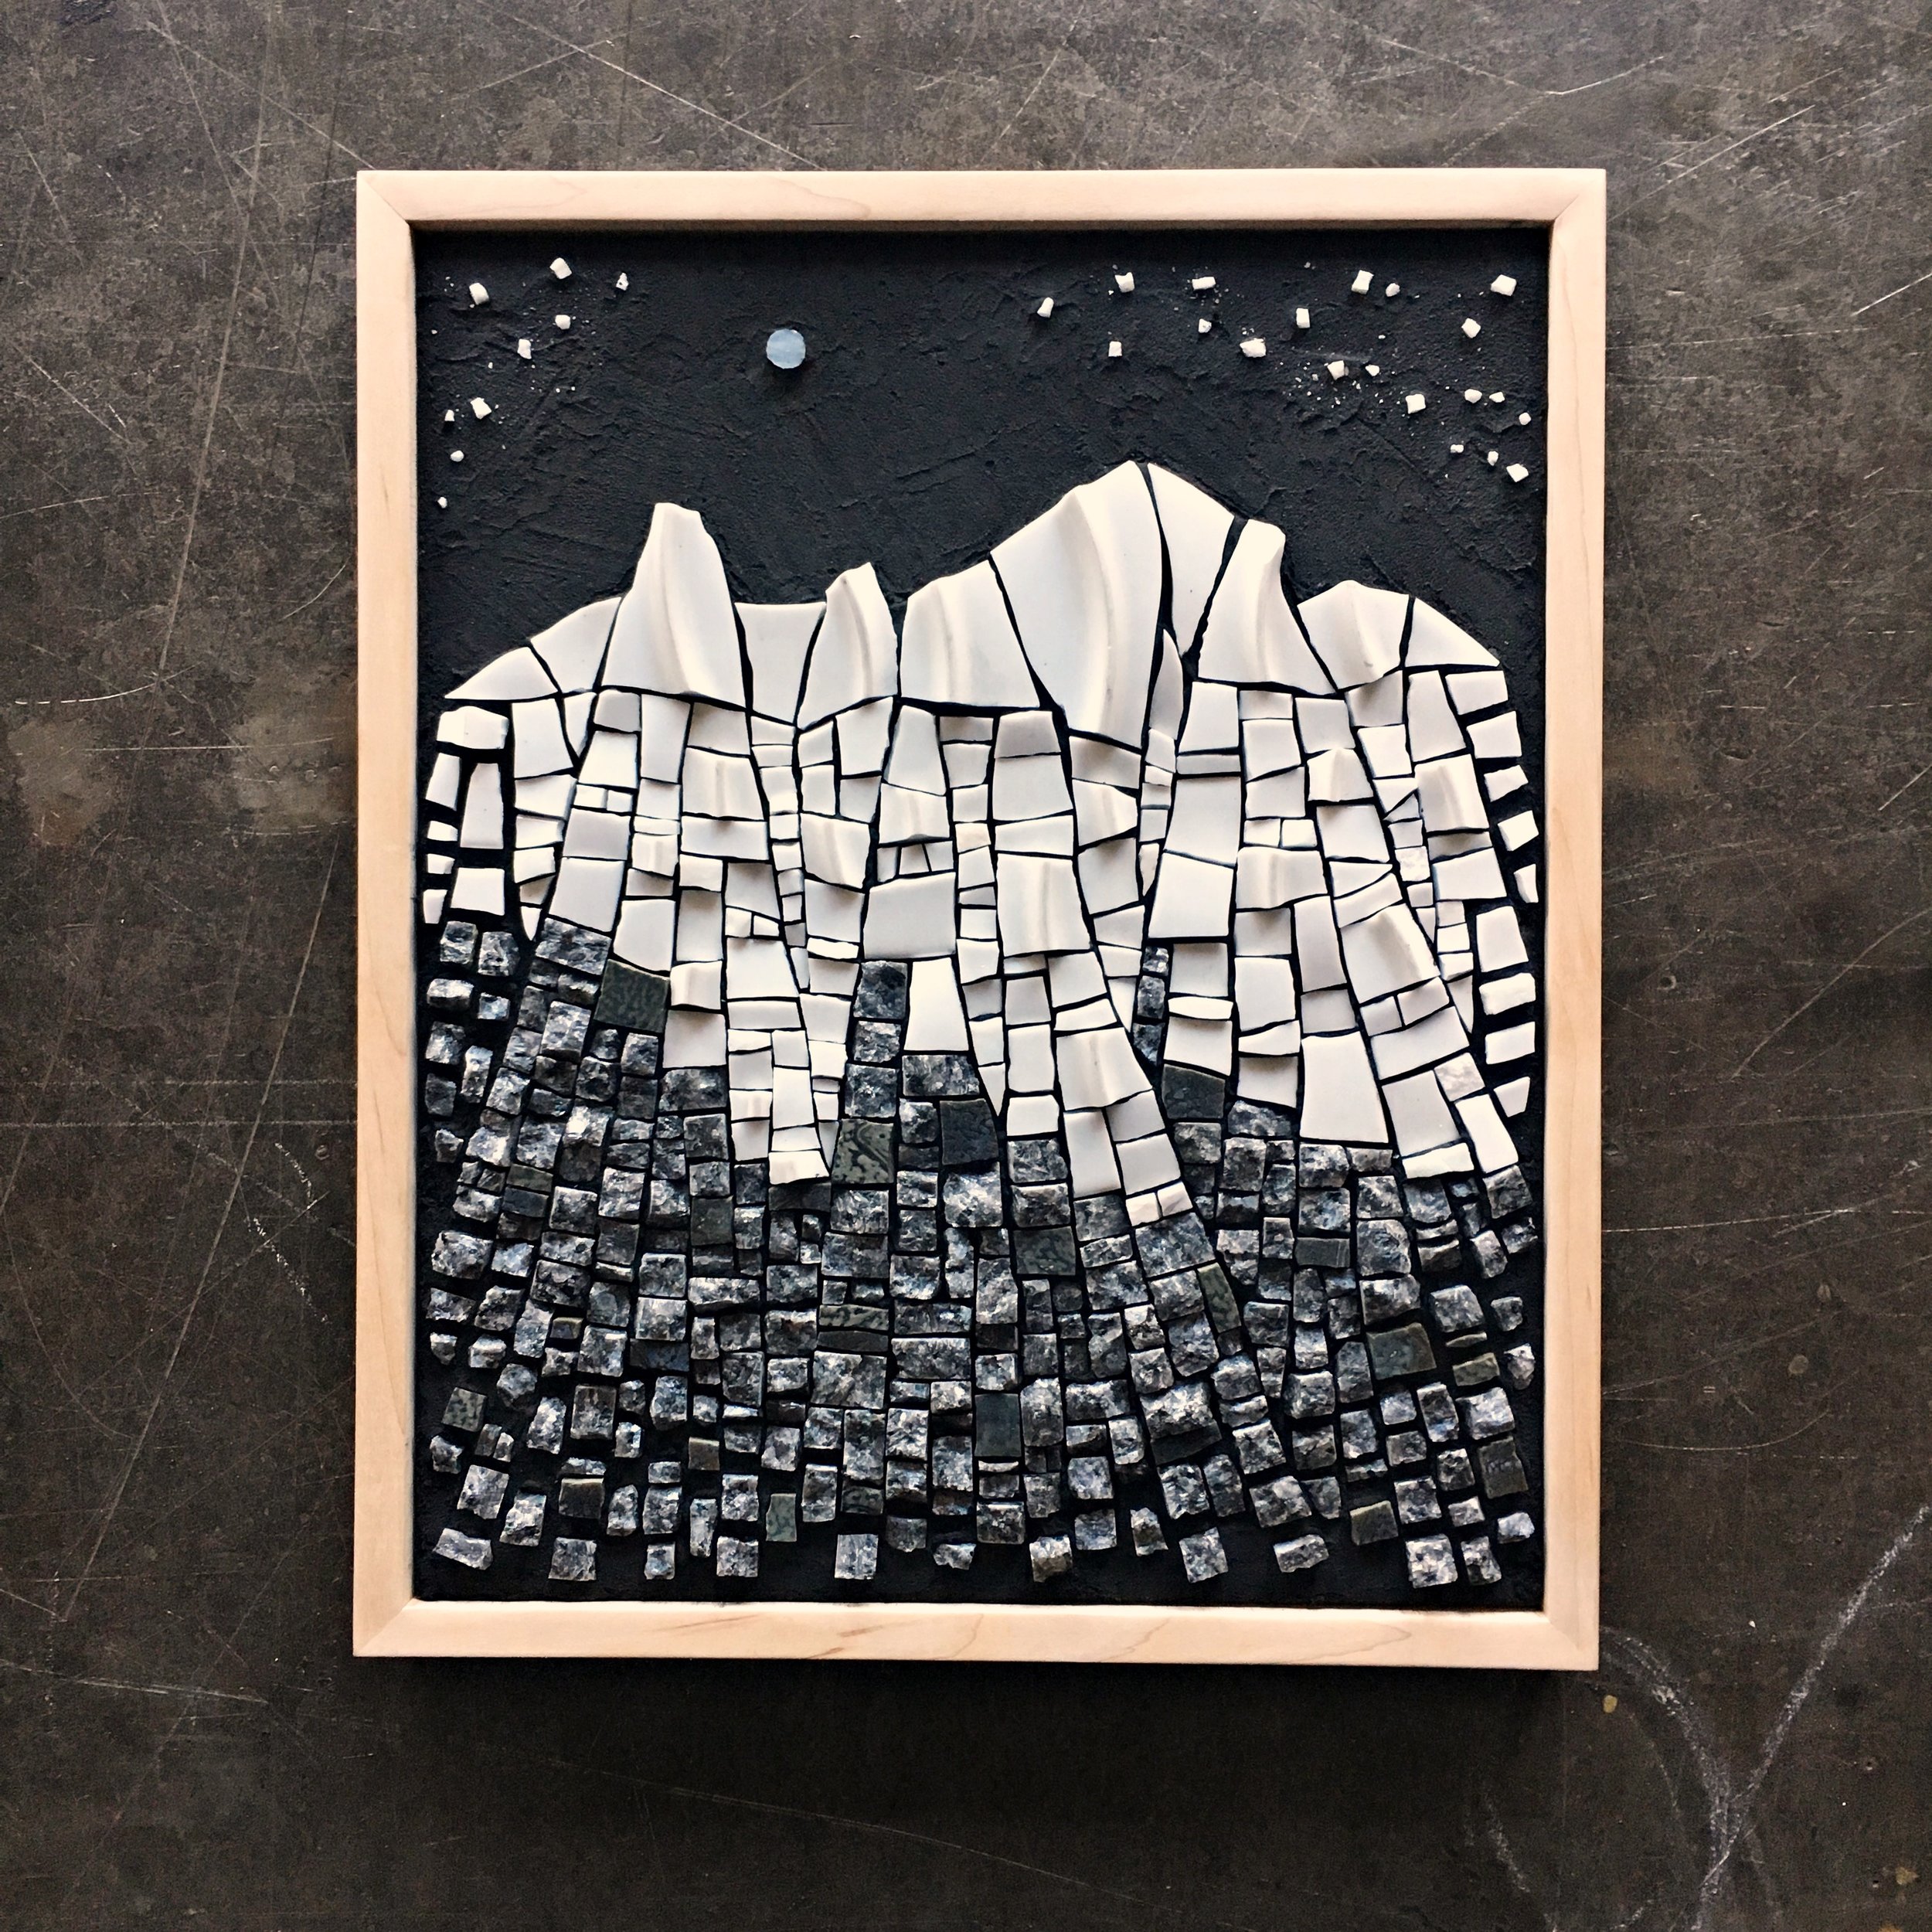 "In the Mountain's Shadow" mosaic art